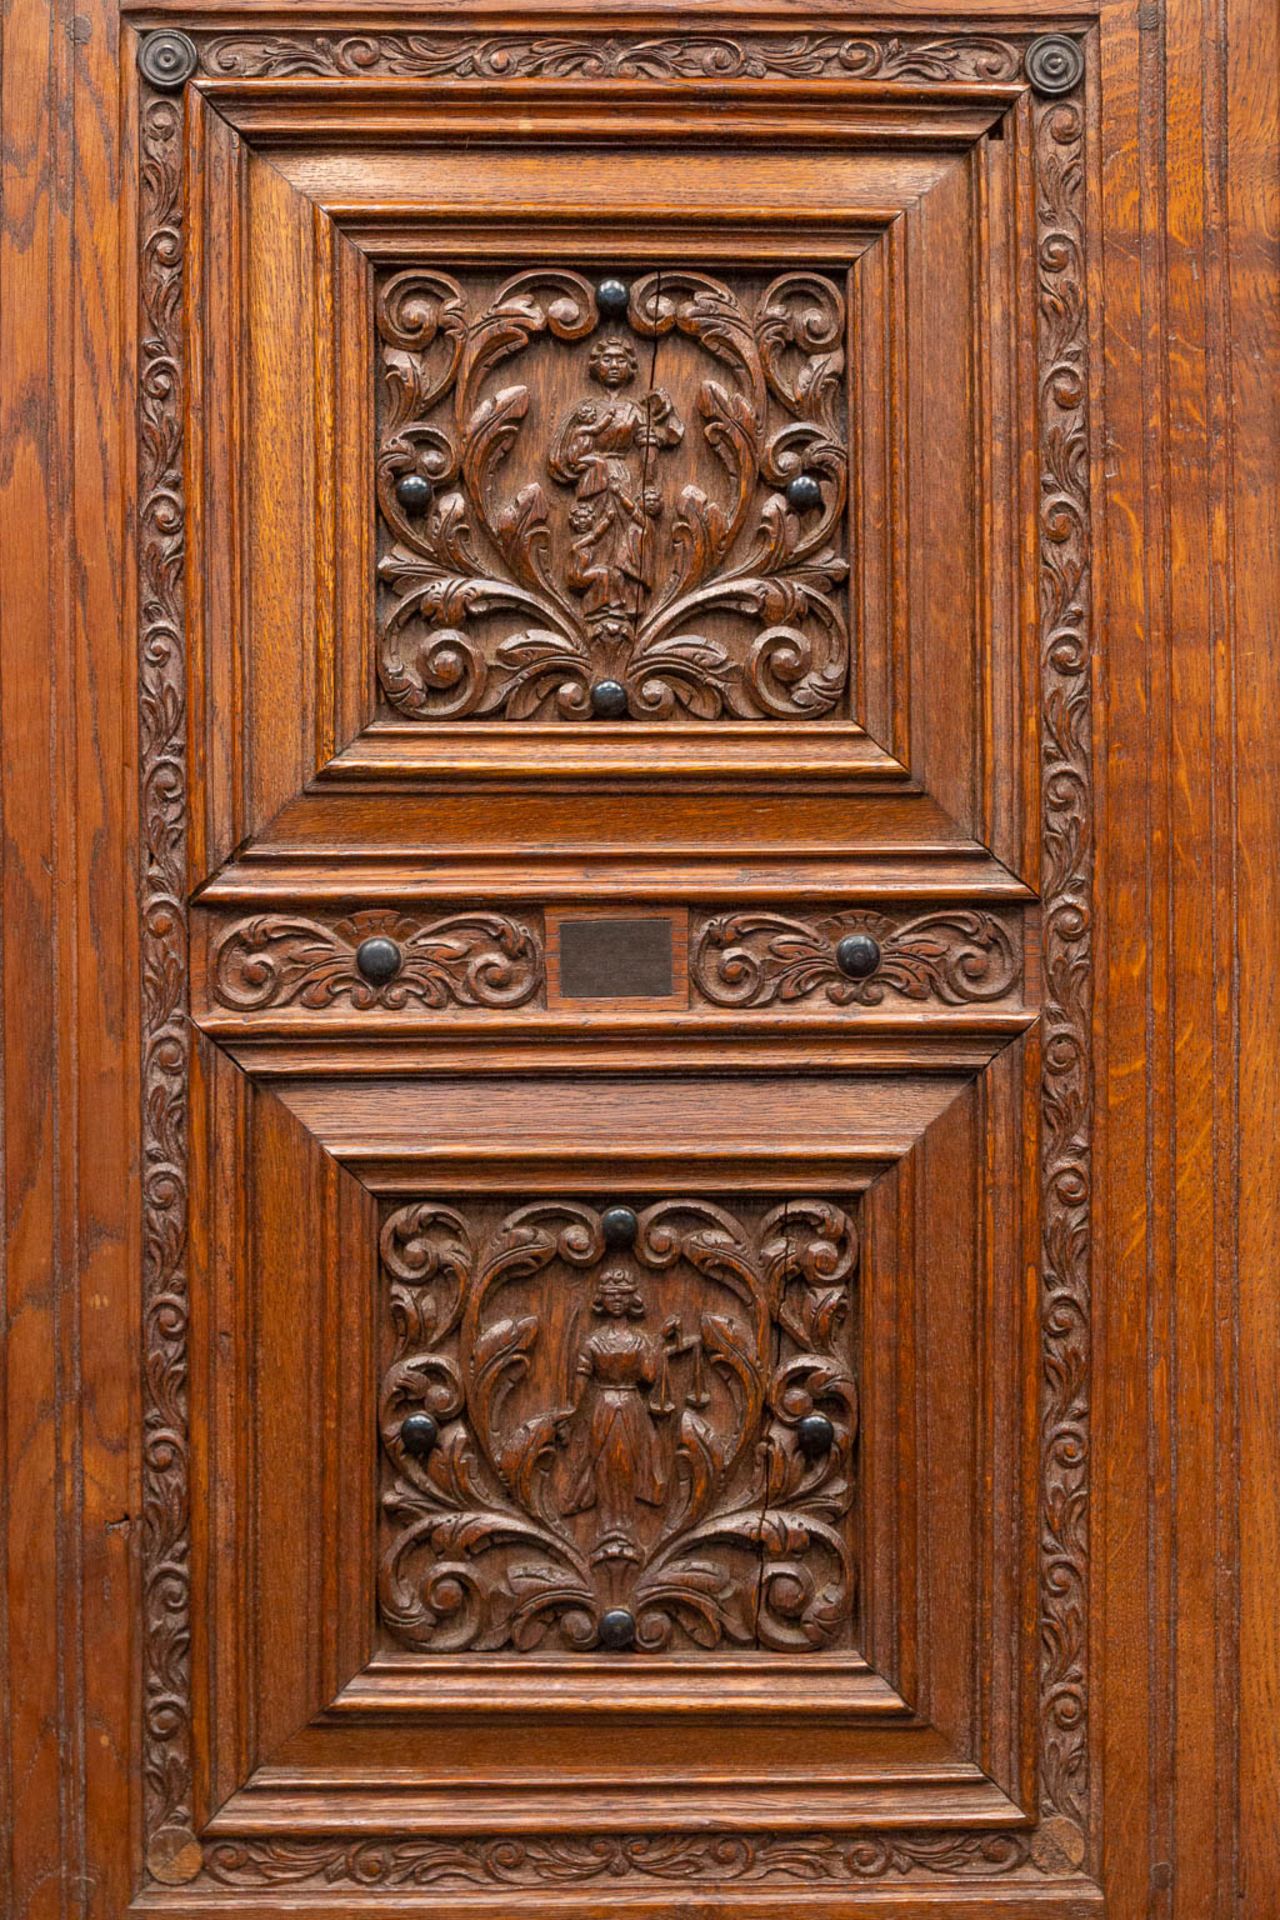 A cabinet, made in Flemish renaissance style, oak with fine sculptures, 19th century. - Image 25 of 27